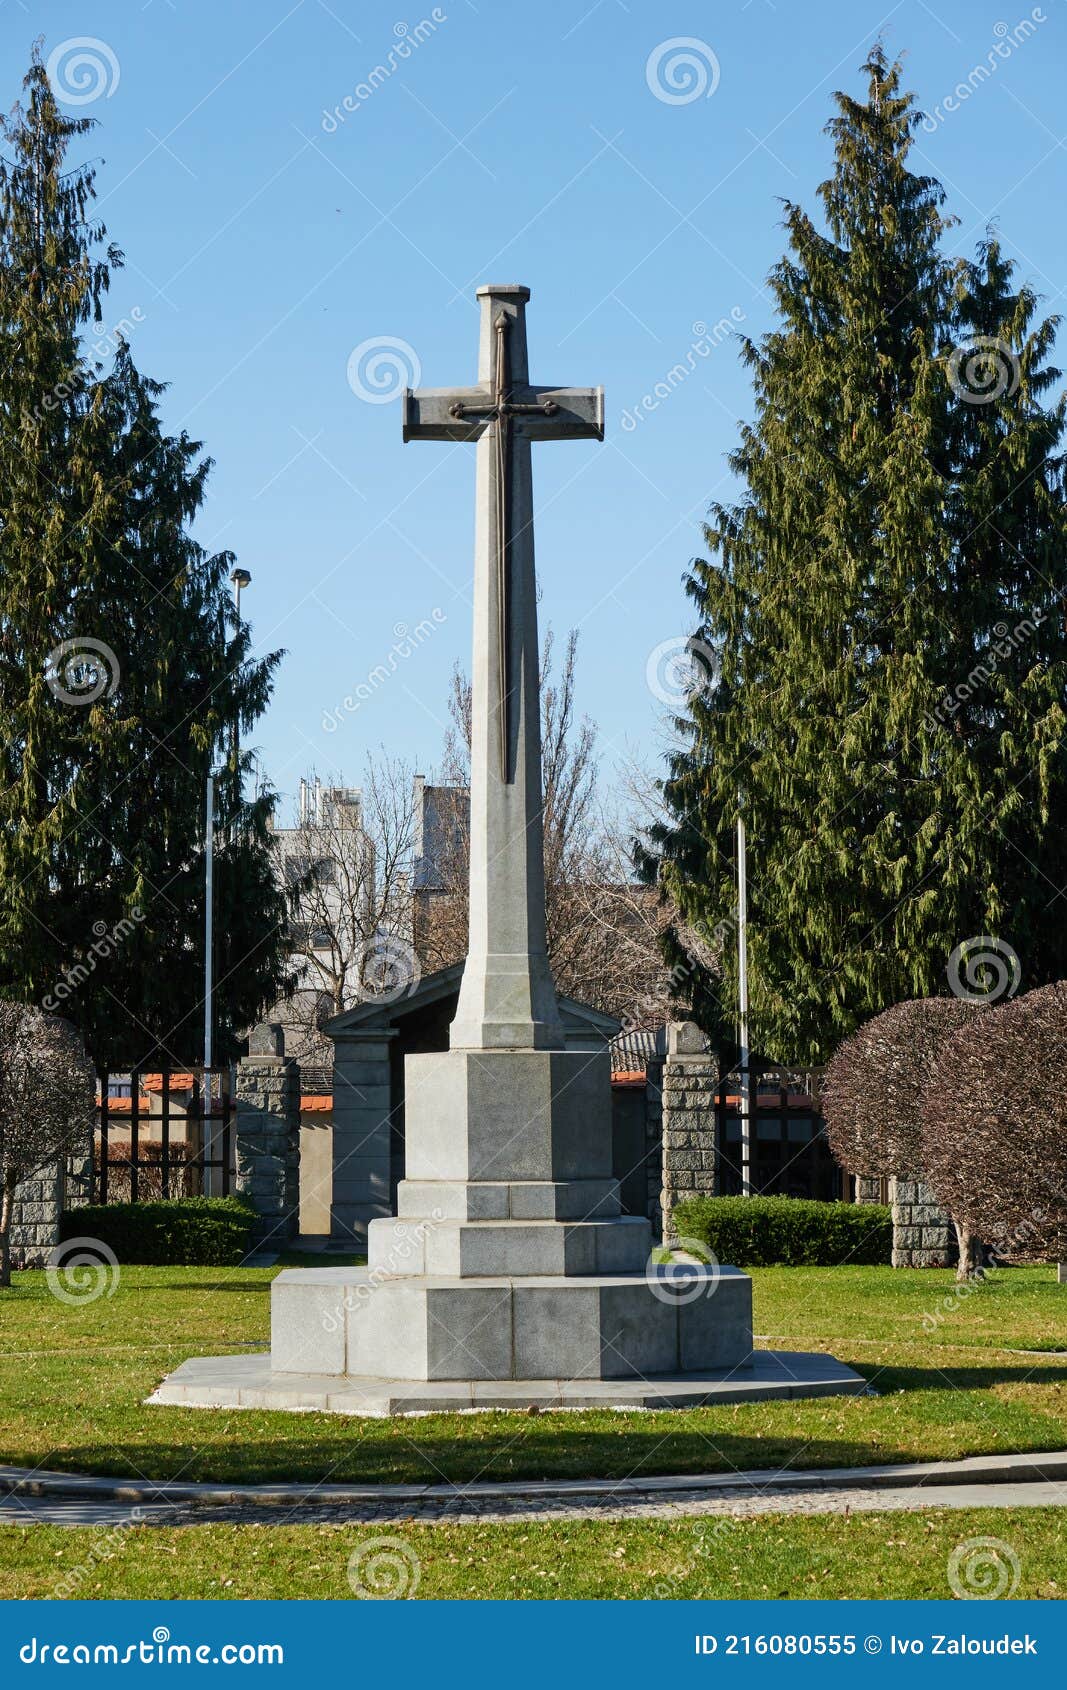 prague, czech republic - march 30, 2021 - prague war cemetery 1939 - 1945. there are even some commonwealth war graves here